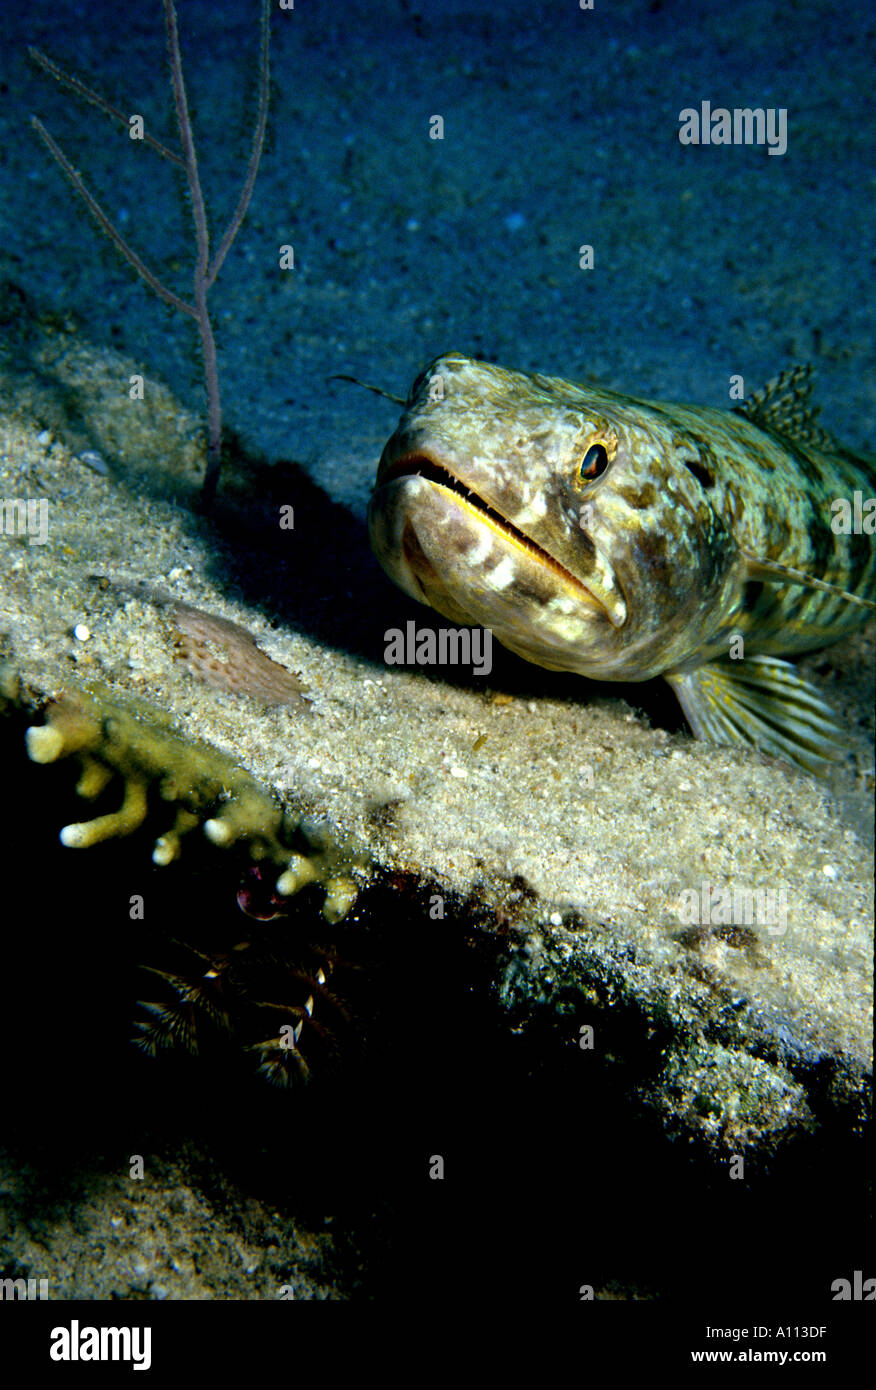 A SAND DIVER Synodus intermedius RESTS ON A PIECE OF WRECKAGE IN THE FLORIDA KEYS Stock Photo